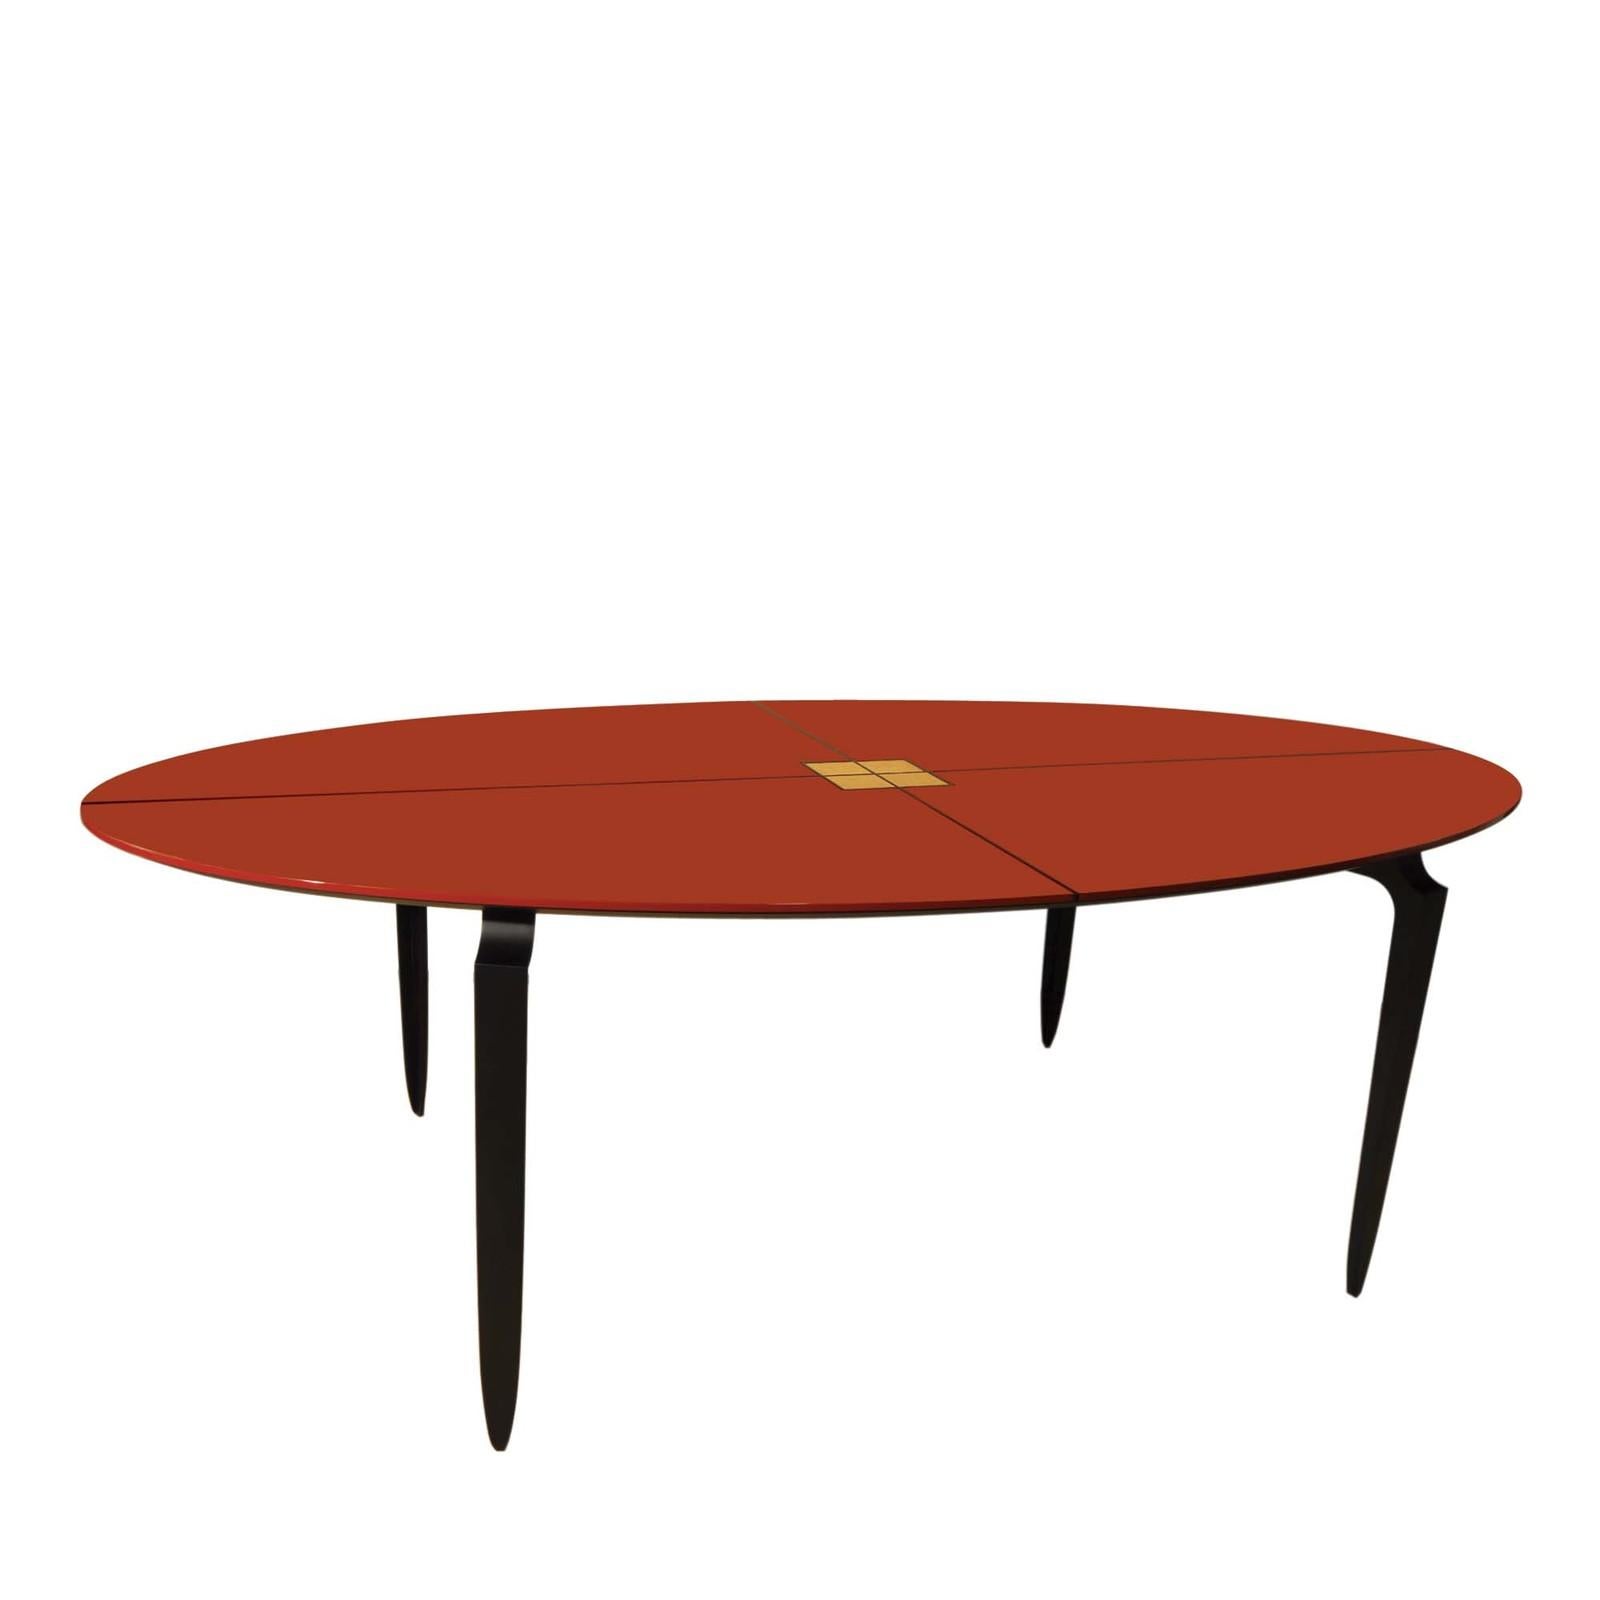 The simple and essential design of this dining table is characterized by a harmonious blend of different materials. Raised on distinctive black powder-coated metal legs, the elliptical top is lacquered in glossy red china polyurethane with a cross